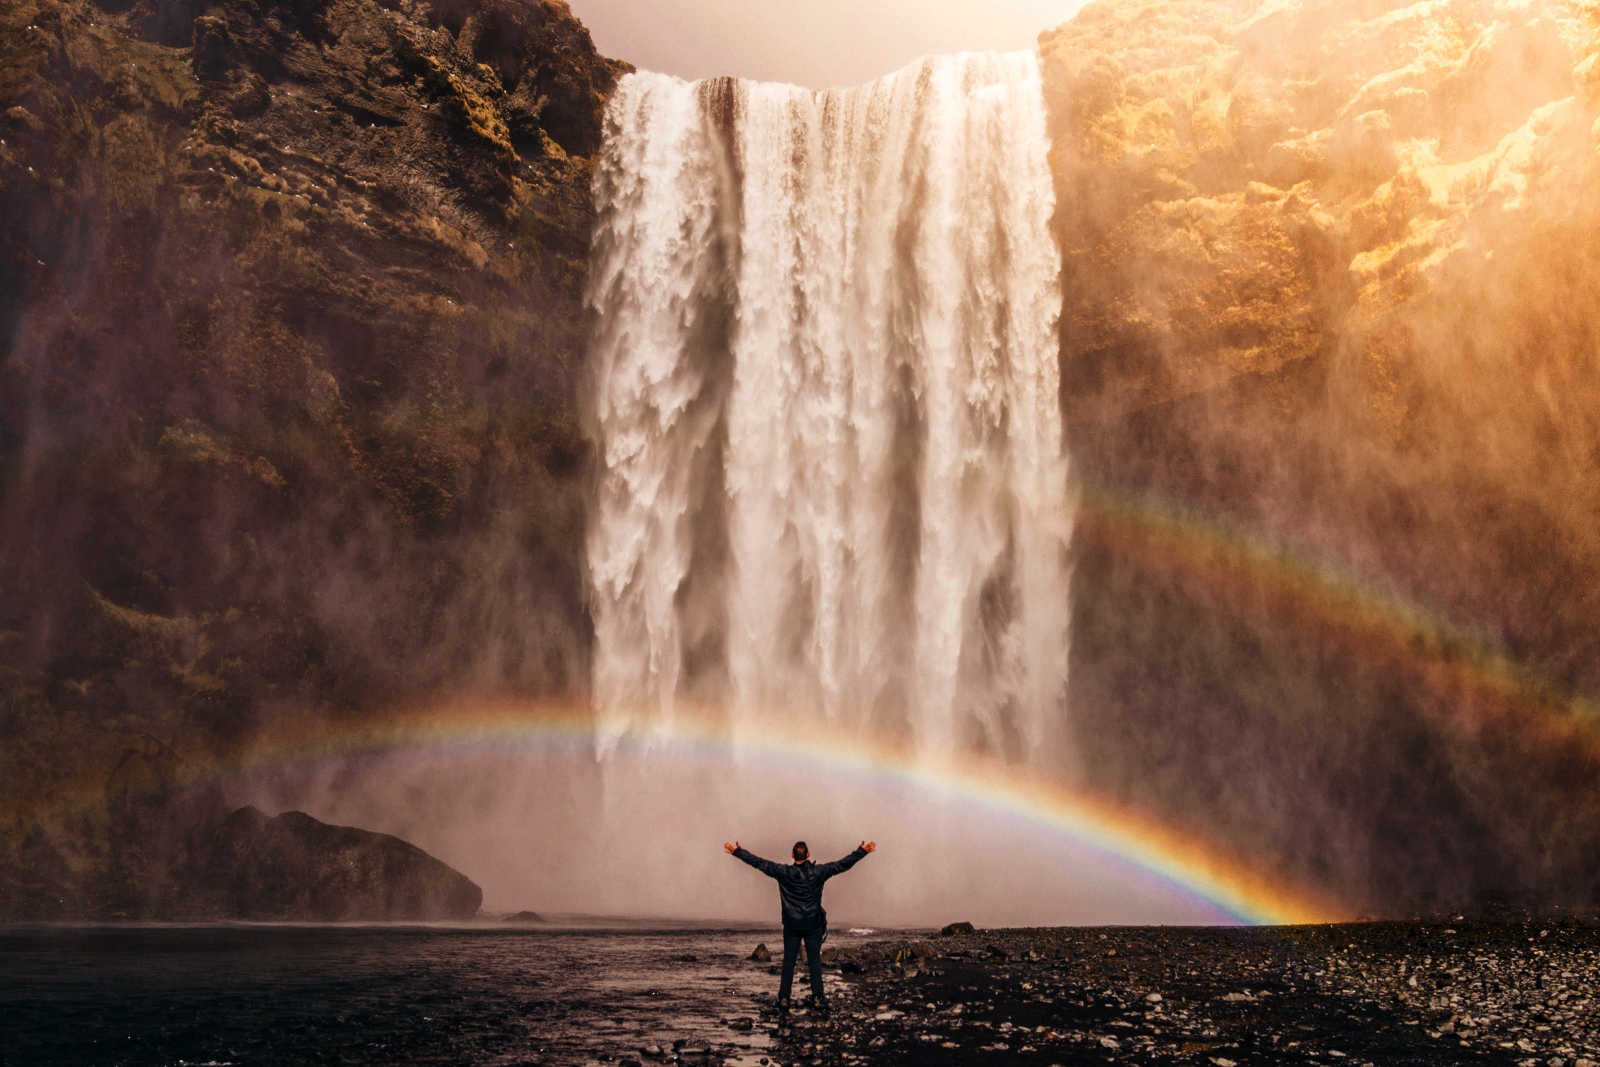 A man standing beneath a waterfall casting a rainbow